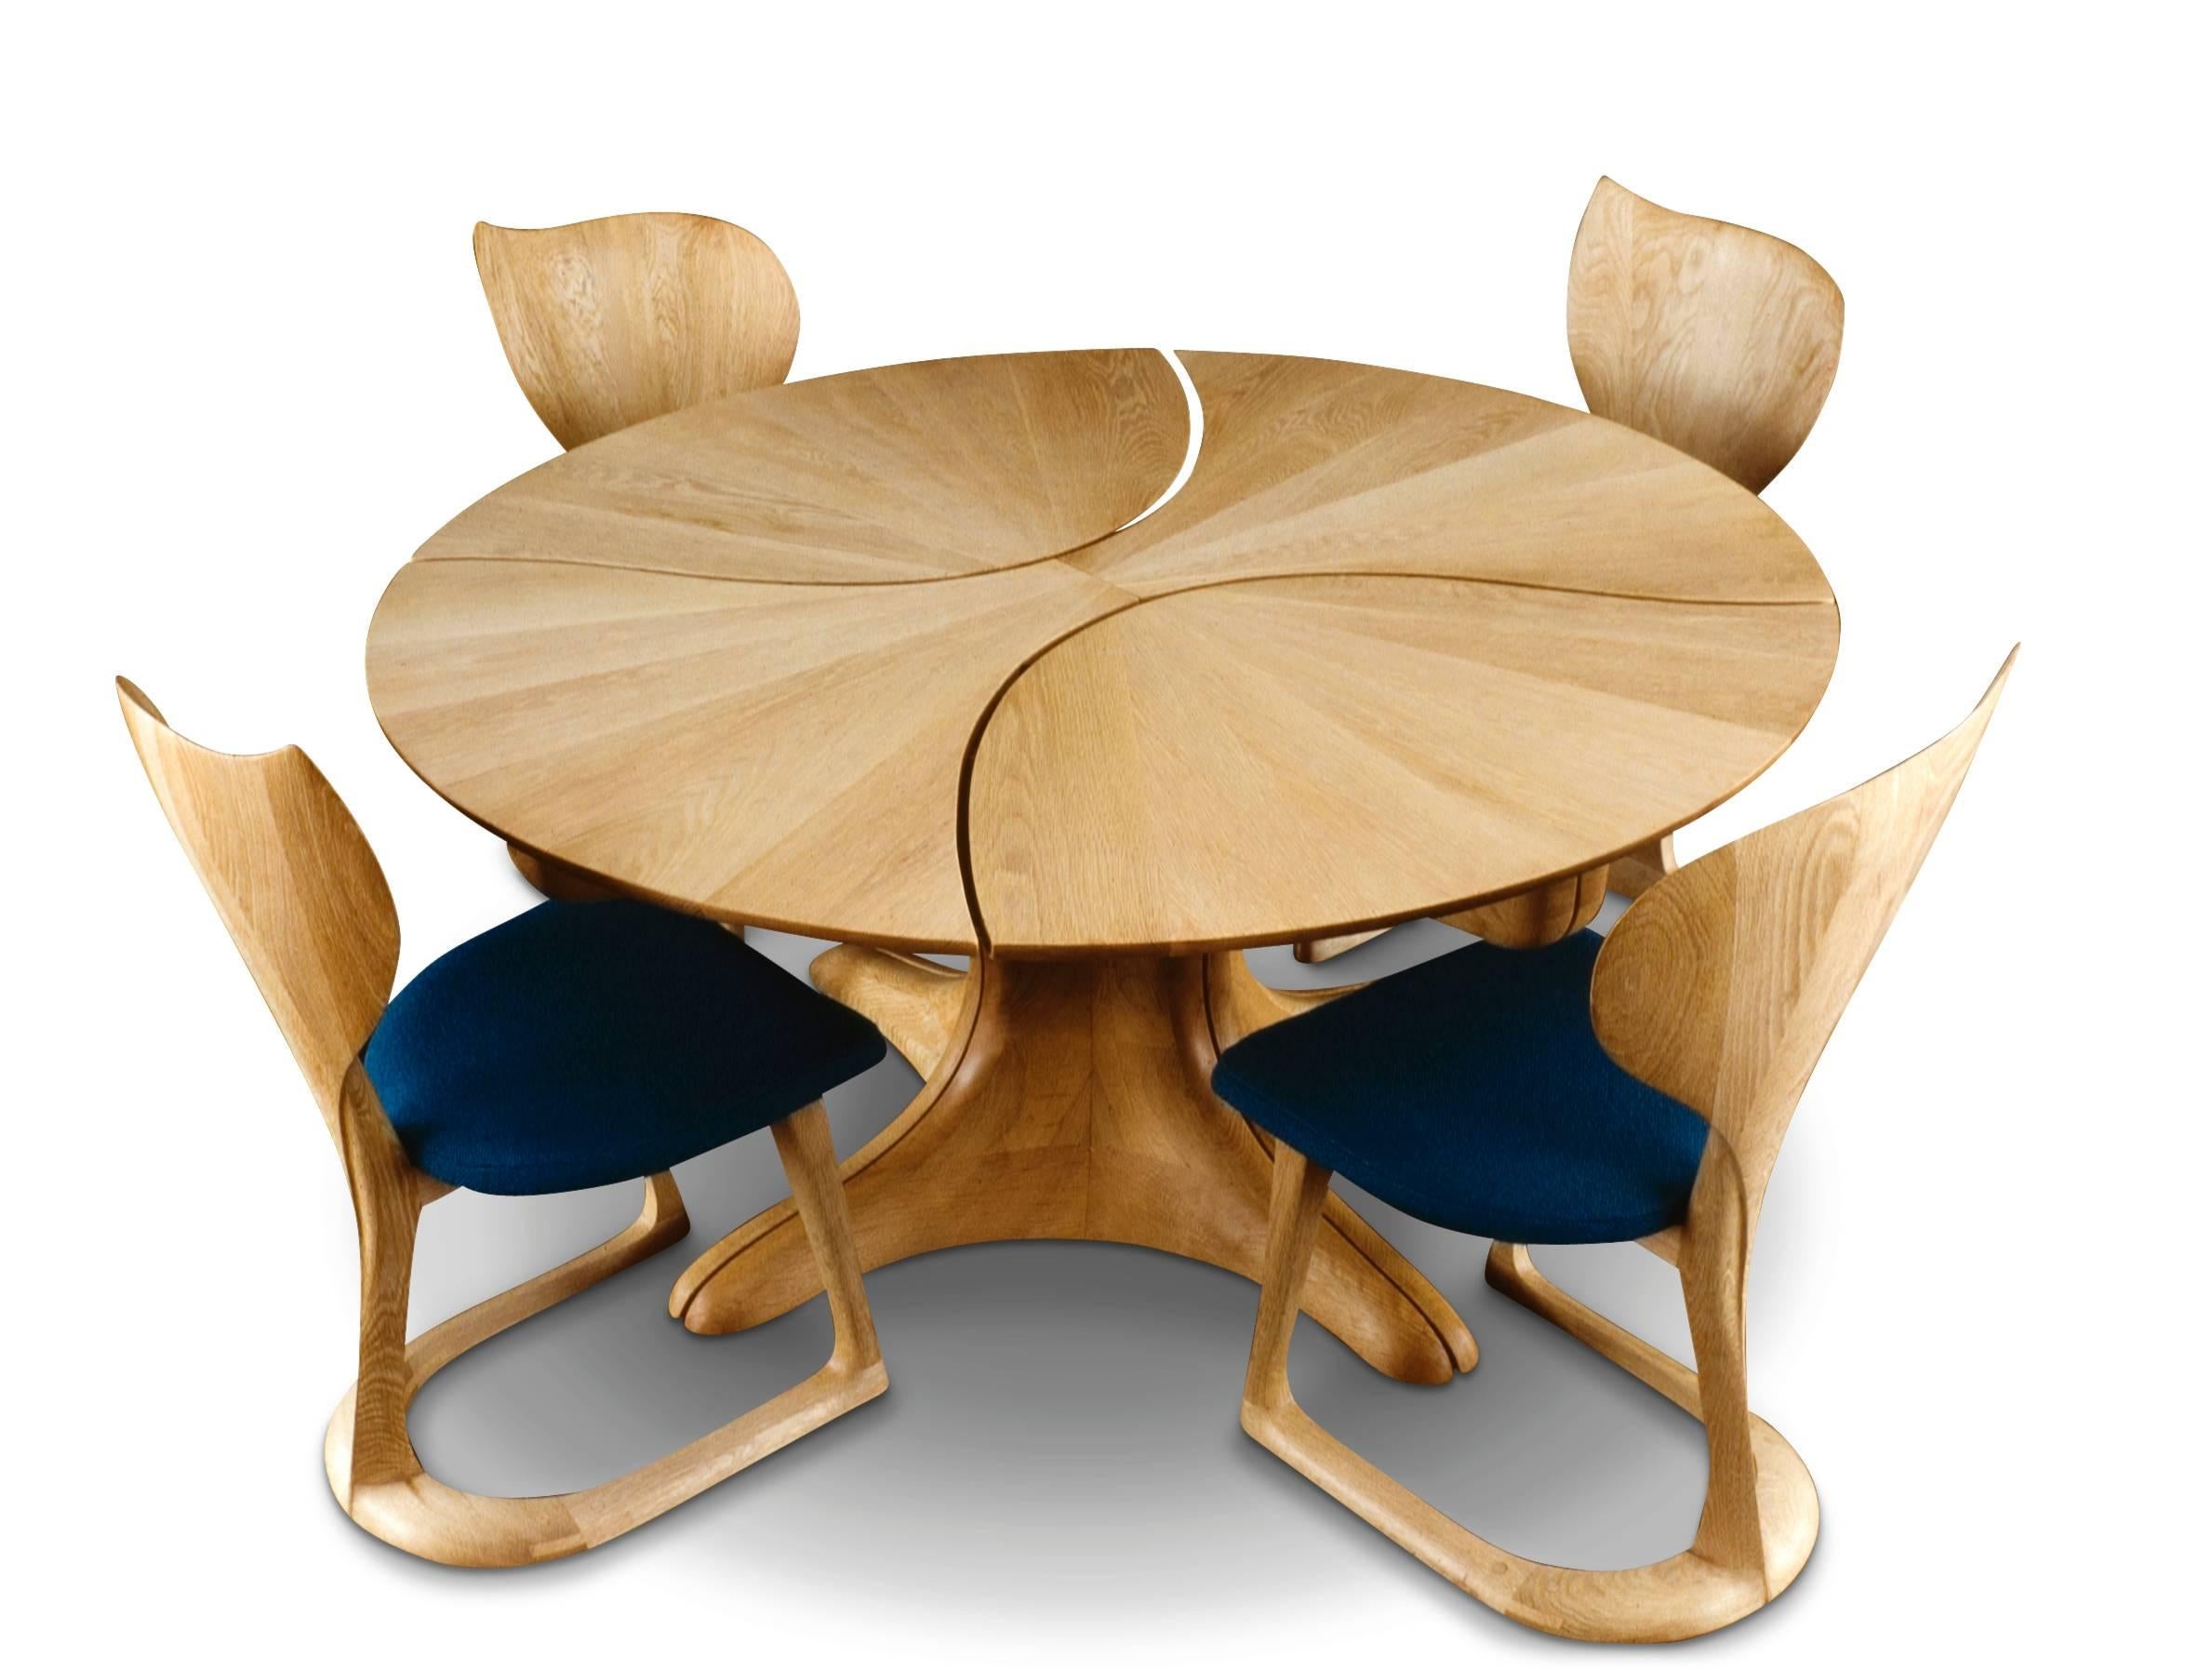 Made from bleached white oak, this table is a variation on an earlier version of the Lily Pad table. This circular table extends to an oval, extension leaves store under the table top when not in use.

Table seen here with 